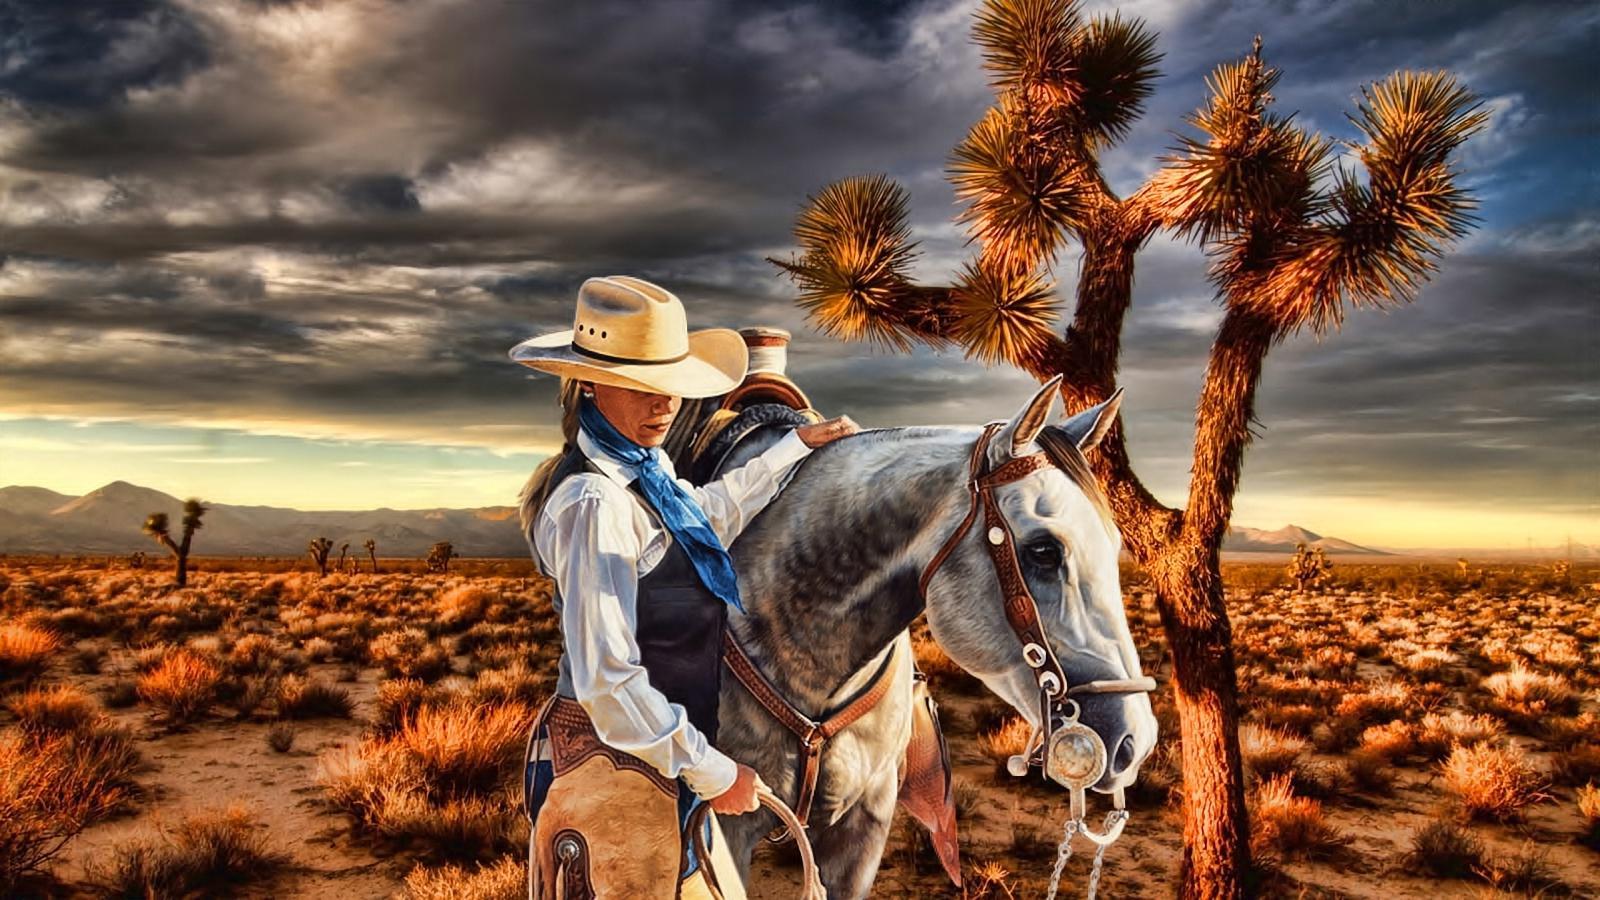 Cowgirl aesthetic wallpaper by hailybussey  Download on ZEDGE  a871